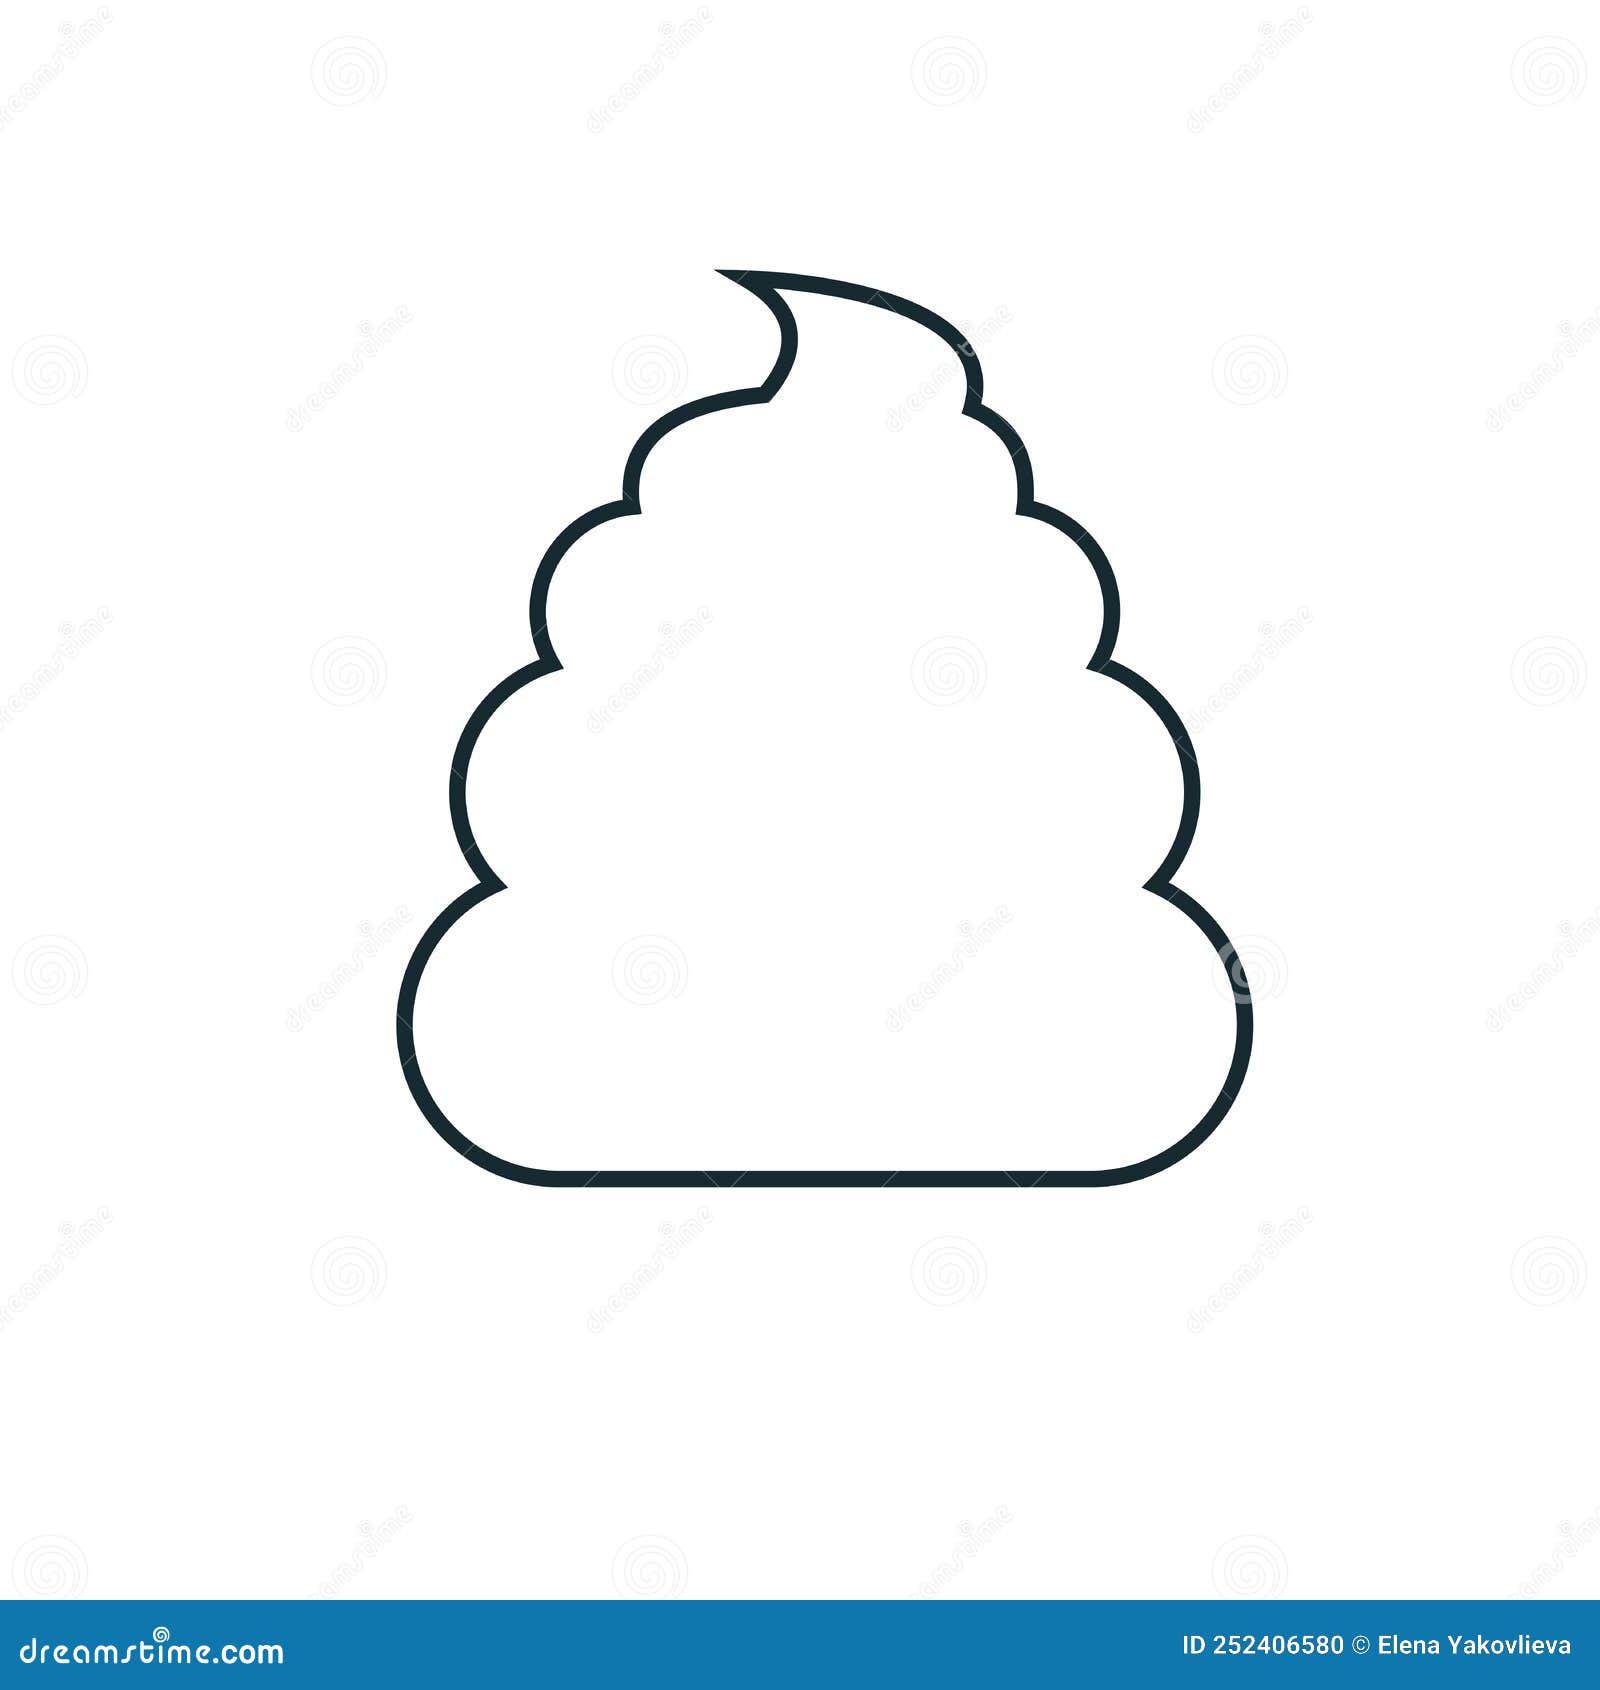 Poop Character in Line Style. Vector Illustration Stock Vector ...